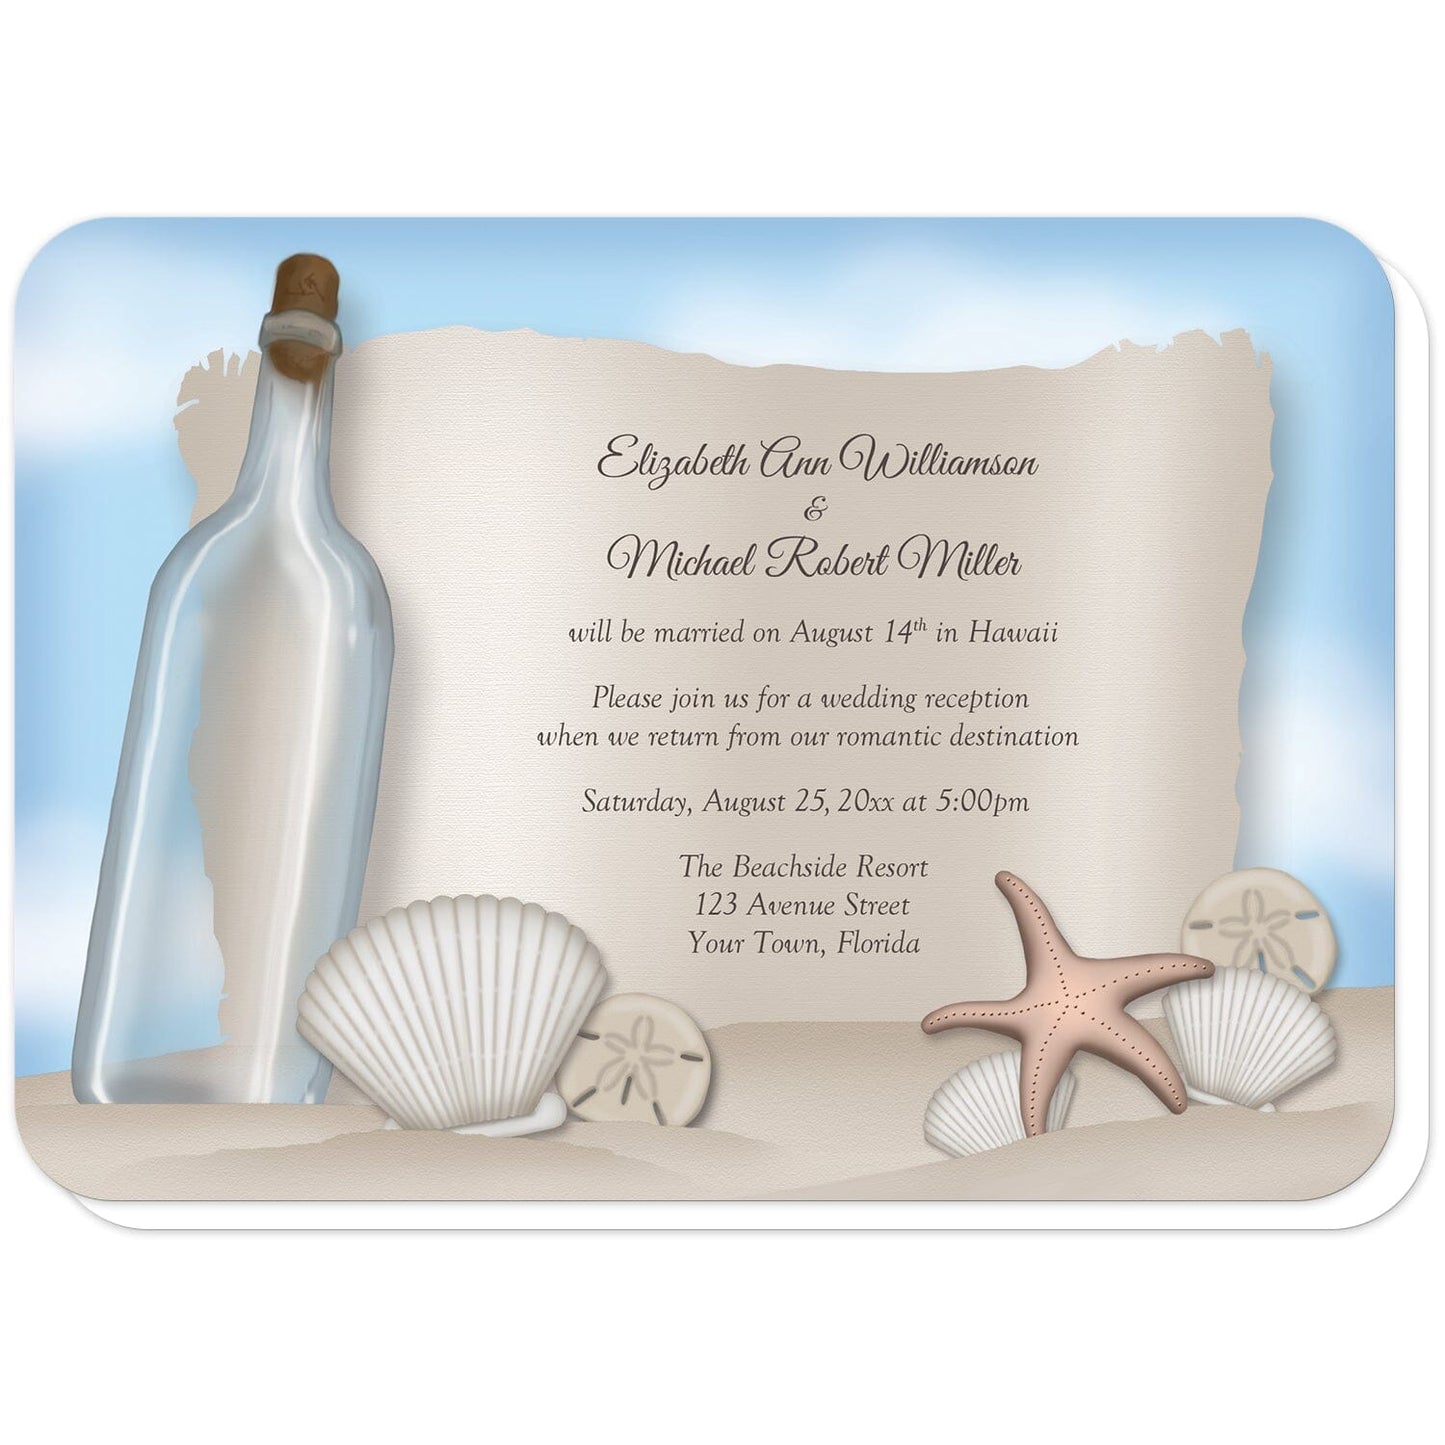 Message from a Bottle Beach Reception Only Invitations (with rounded corners) at Artistically Invited. Message from a bottle beach reception only invitations with an "on the beach" and "message from a bottle" theme. They're designed with an illustrated empty glass bottle, a paper message area, beige sand, a blue sky, and assorted seashells. Your personalized post-wedding reception celebration details are custom printed in brown over the paper illustration.